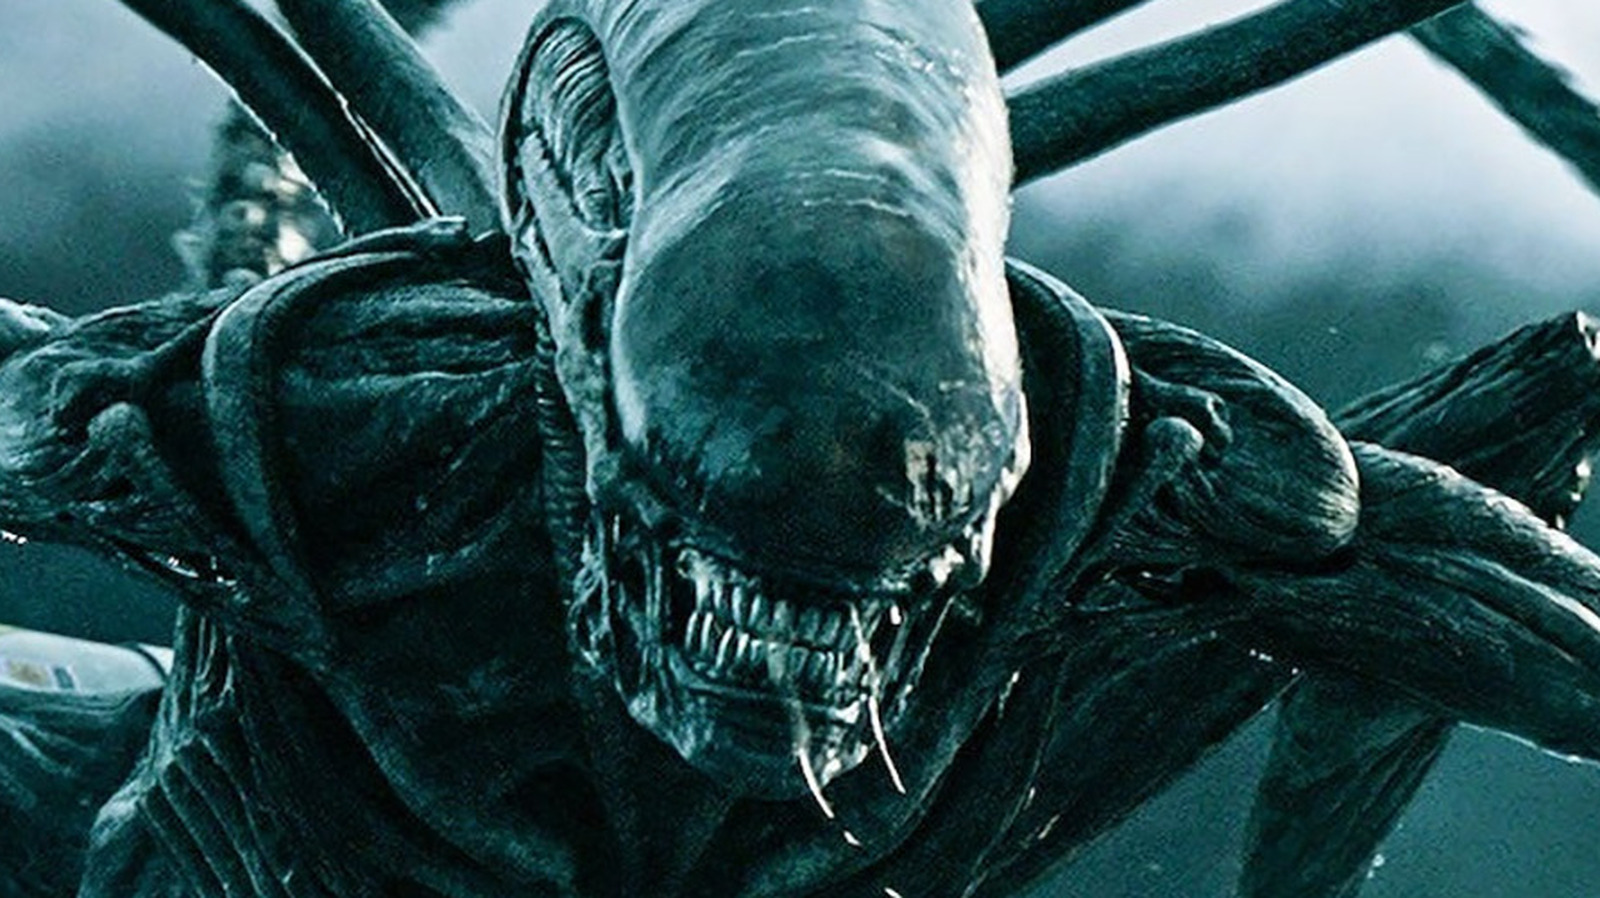 Alien Movies in Order: How to Watch Chronologically and by Release